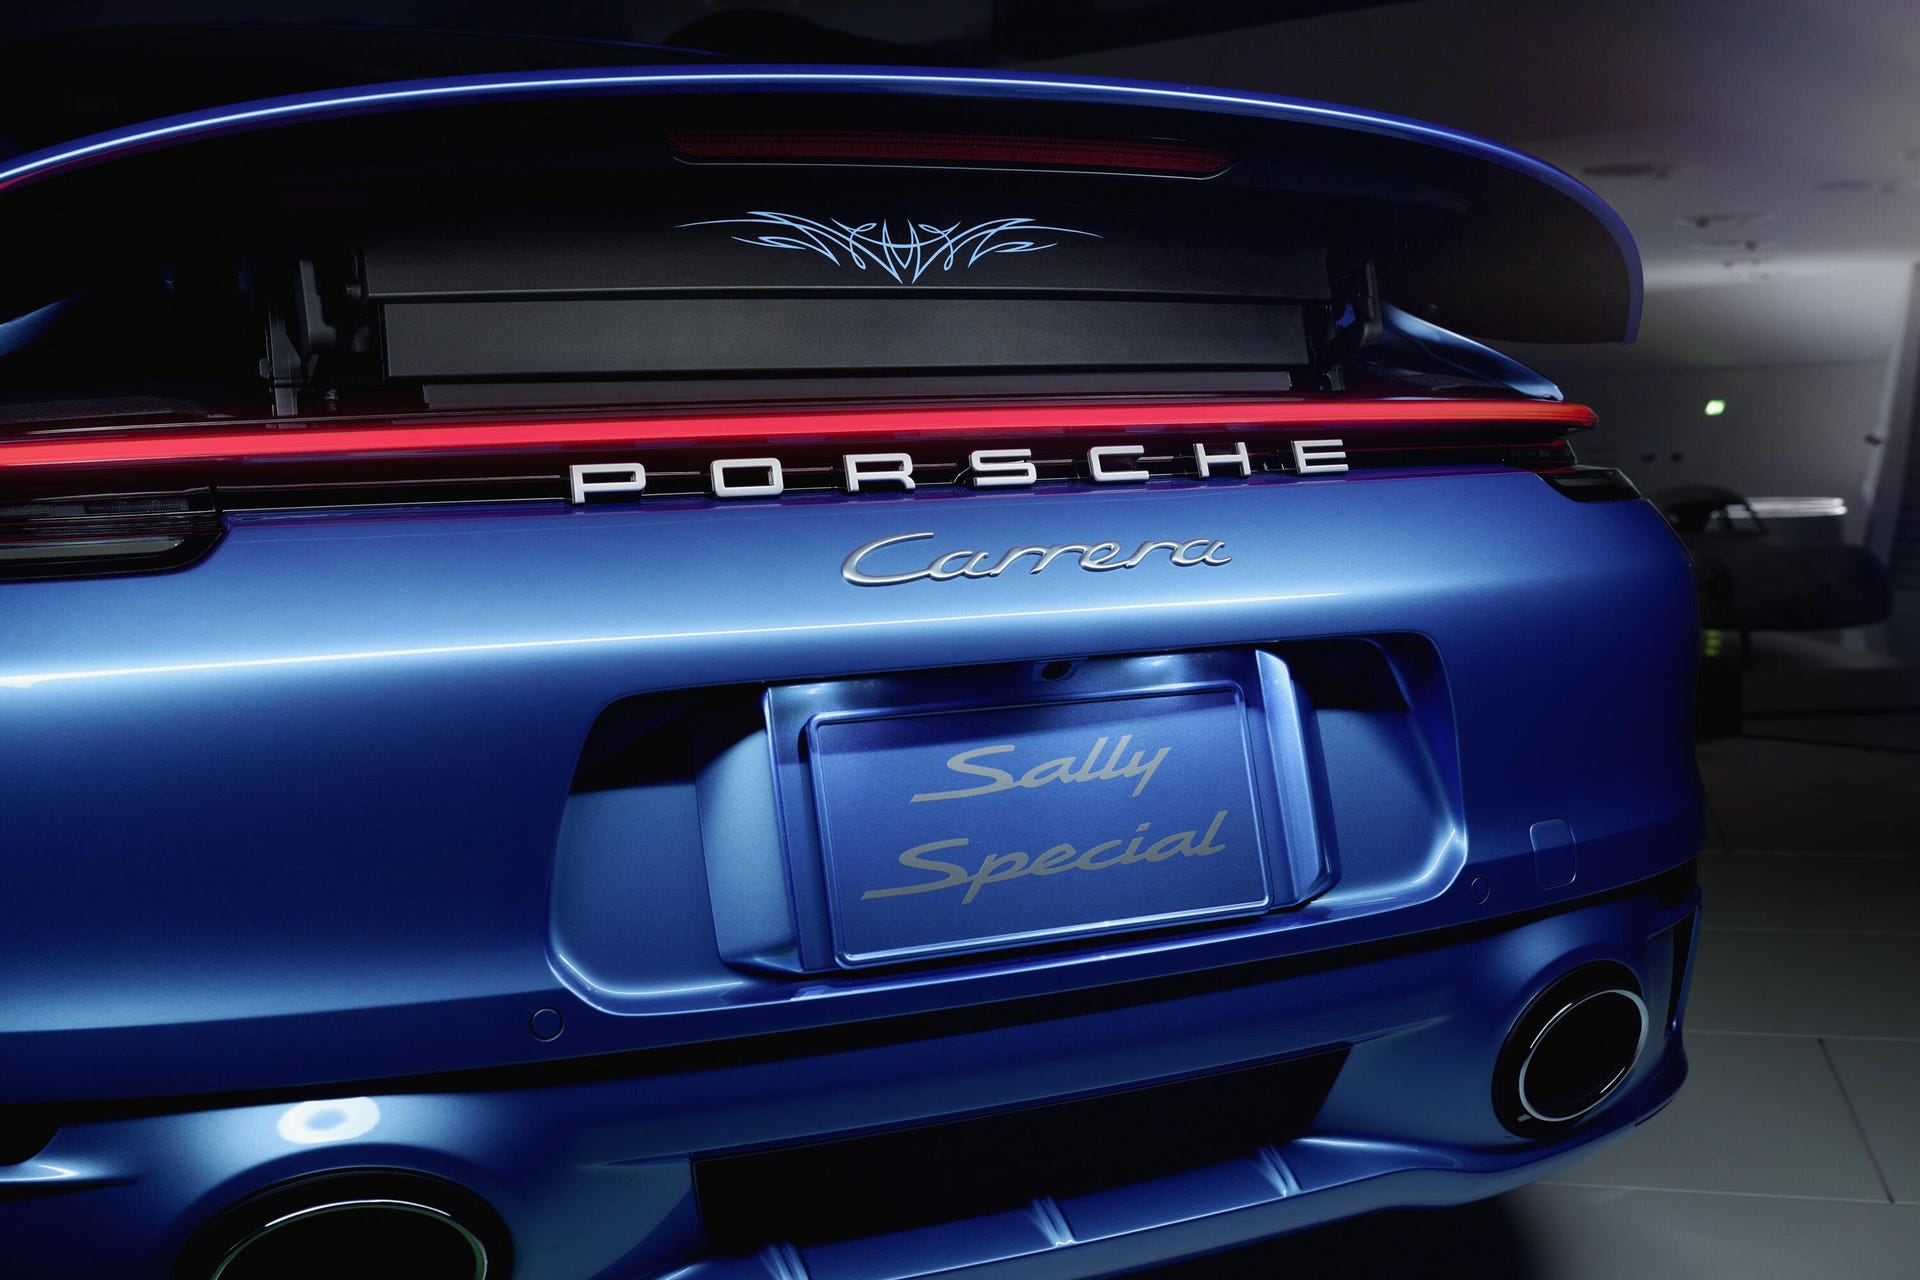 Close-up view of the Porsche 911 Sally Special's spoiler up.